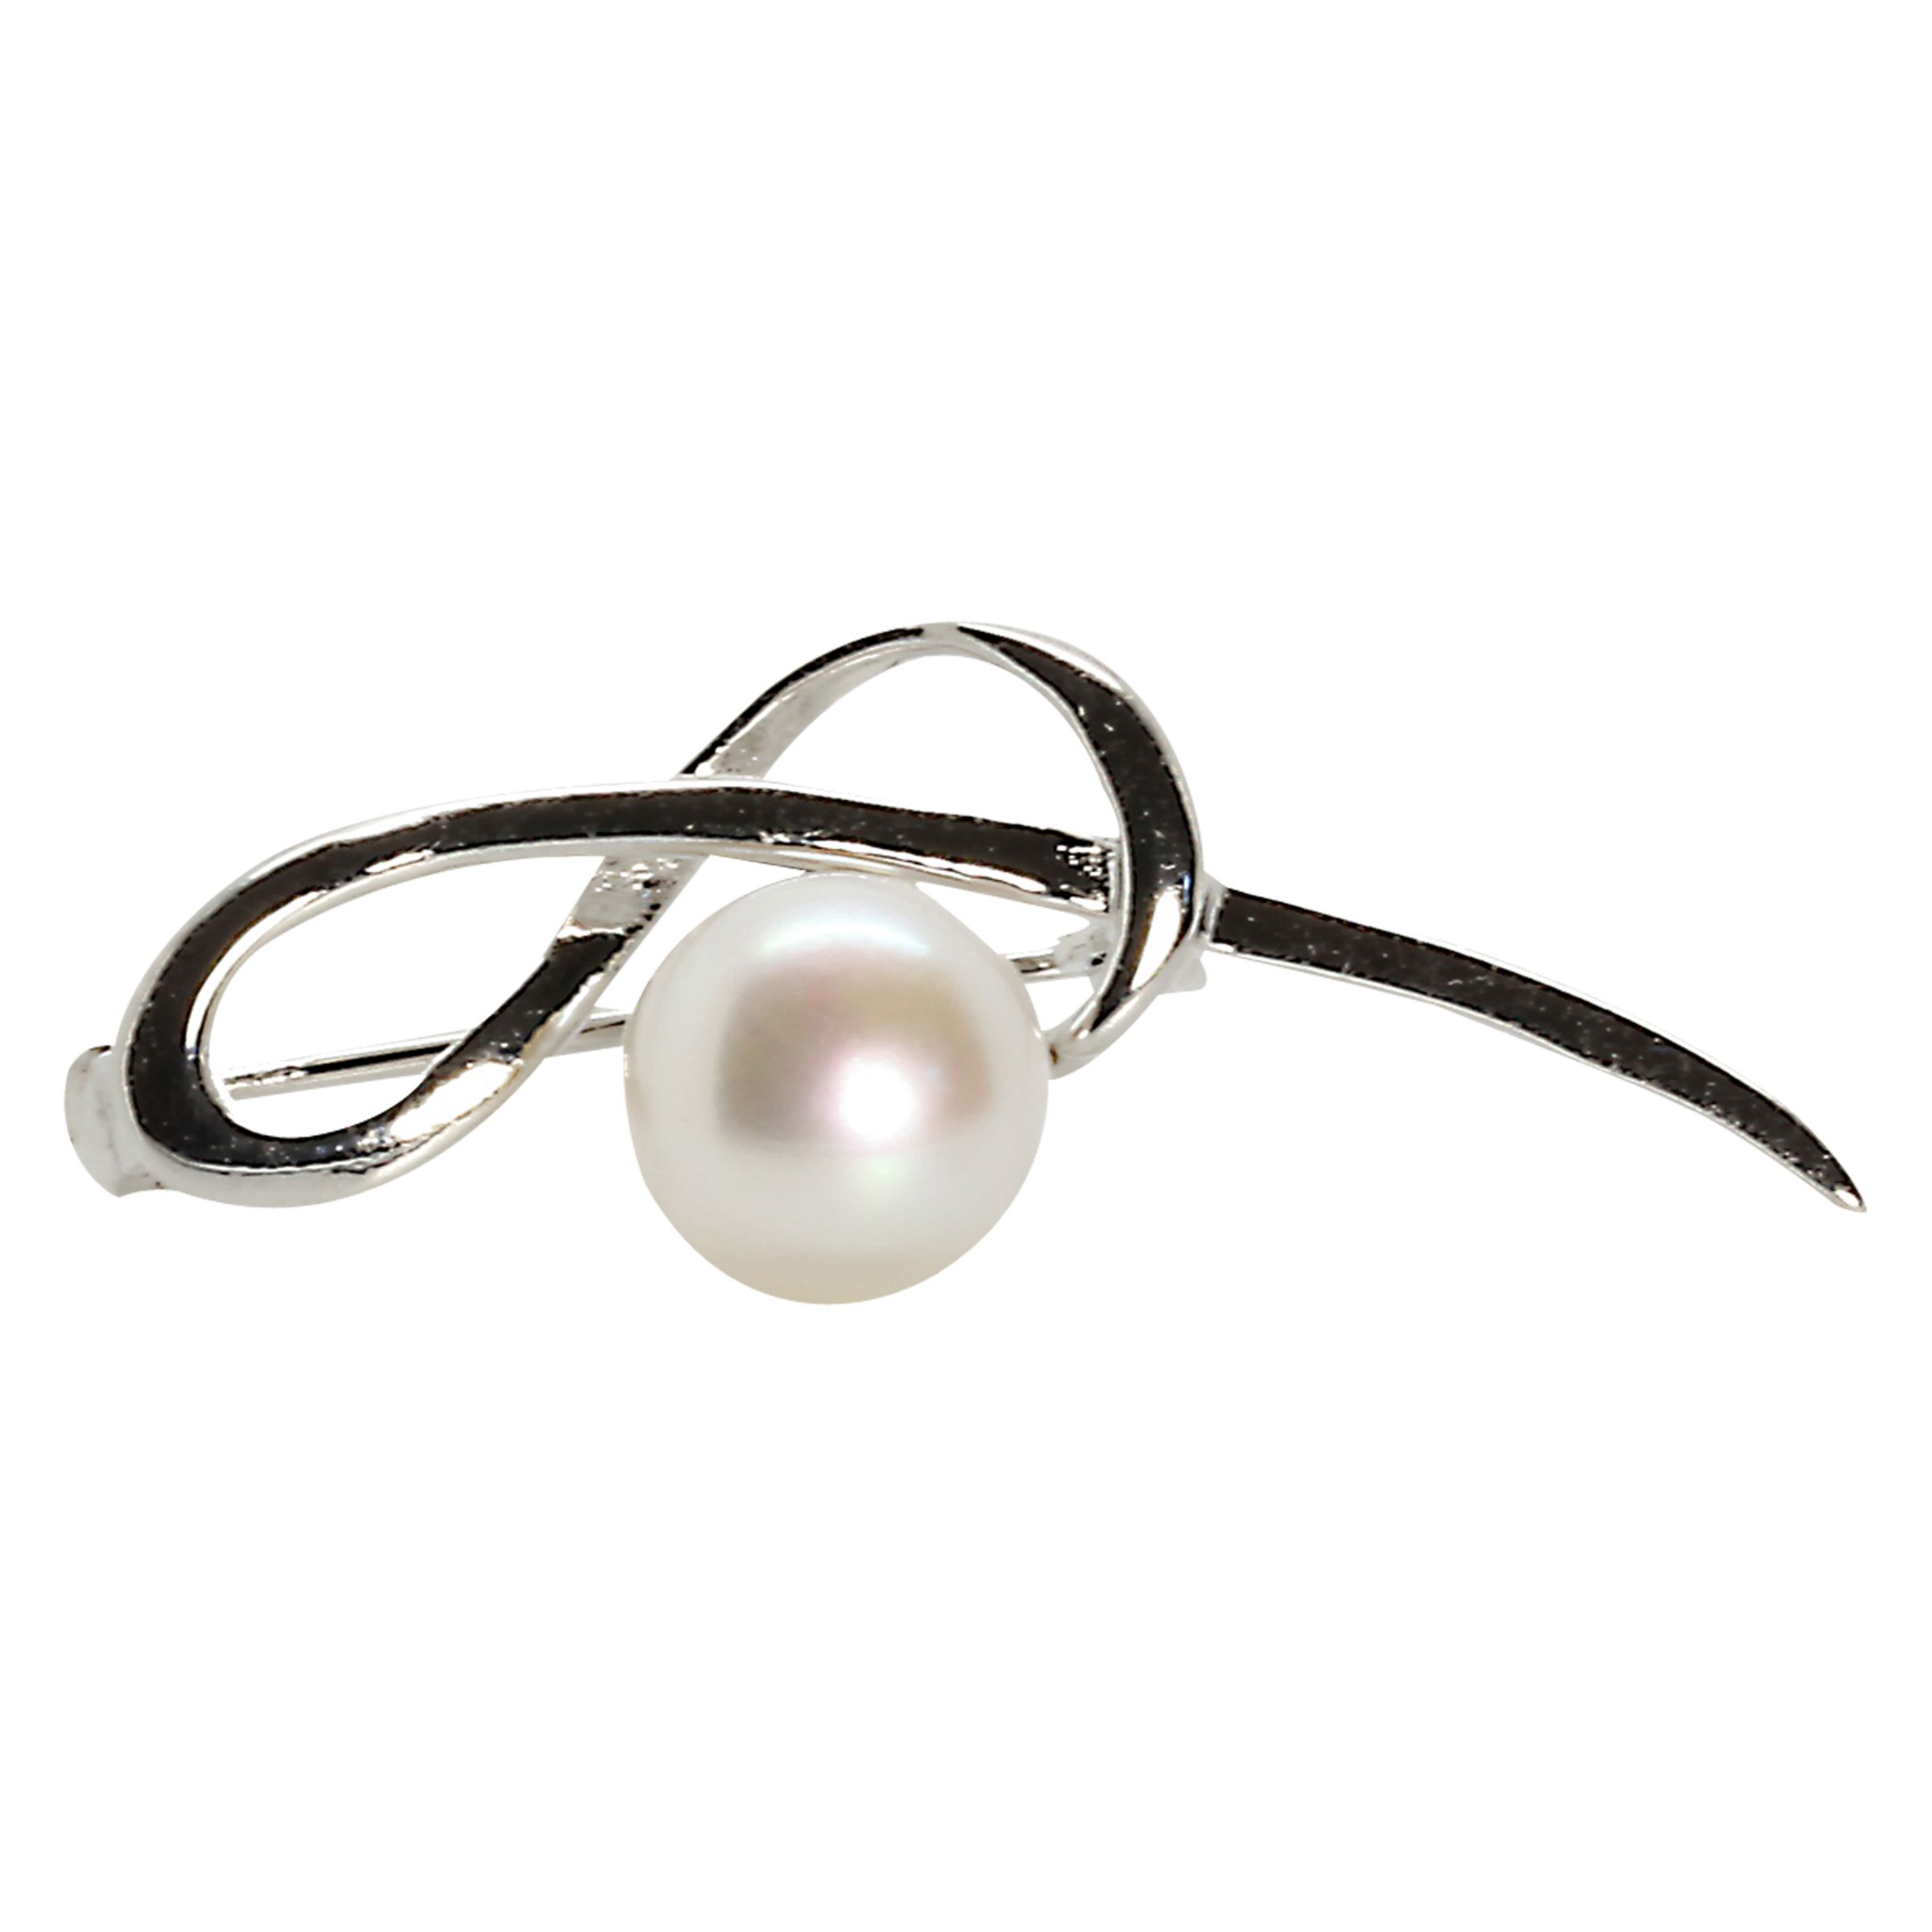 Lido Pearls Freshwater Pearl Brooch, Silver/White